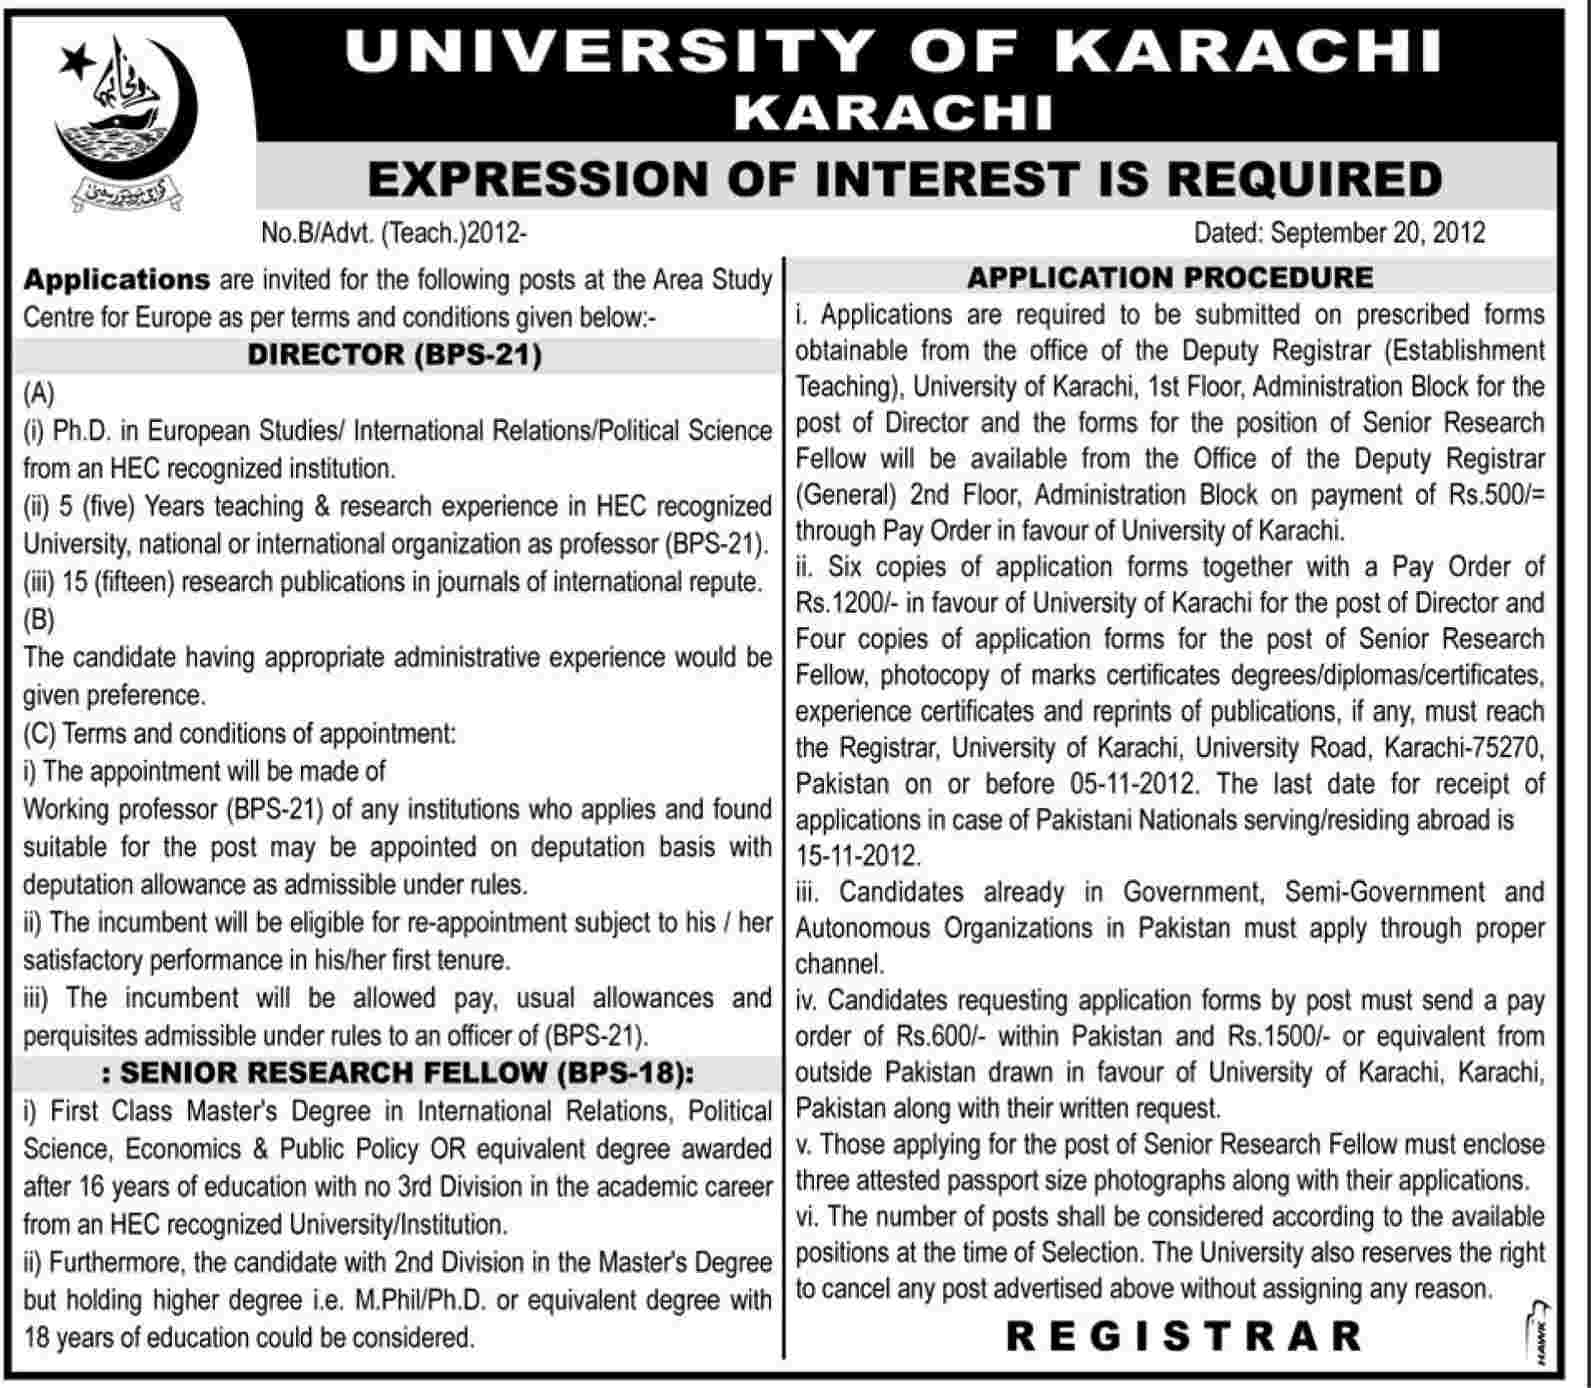 University of Karachi Requires Director and Senior Research Fellow (Government Job)